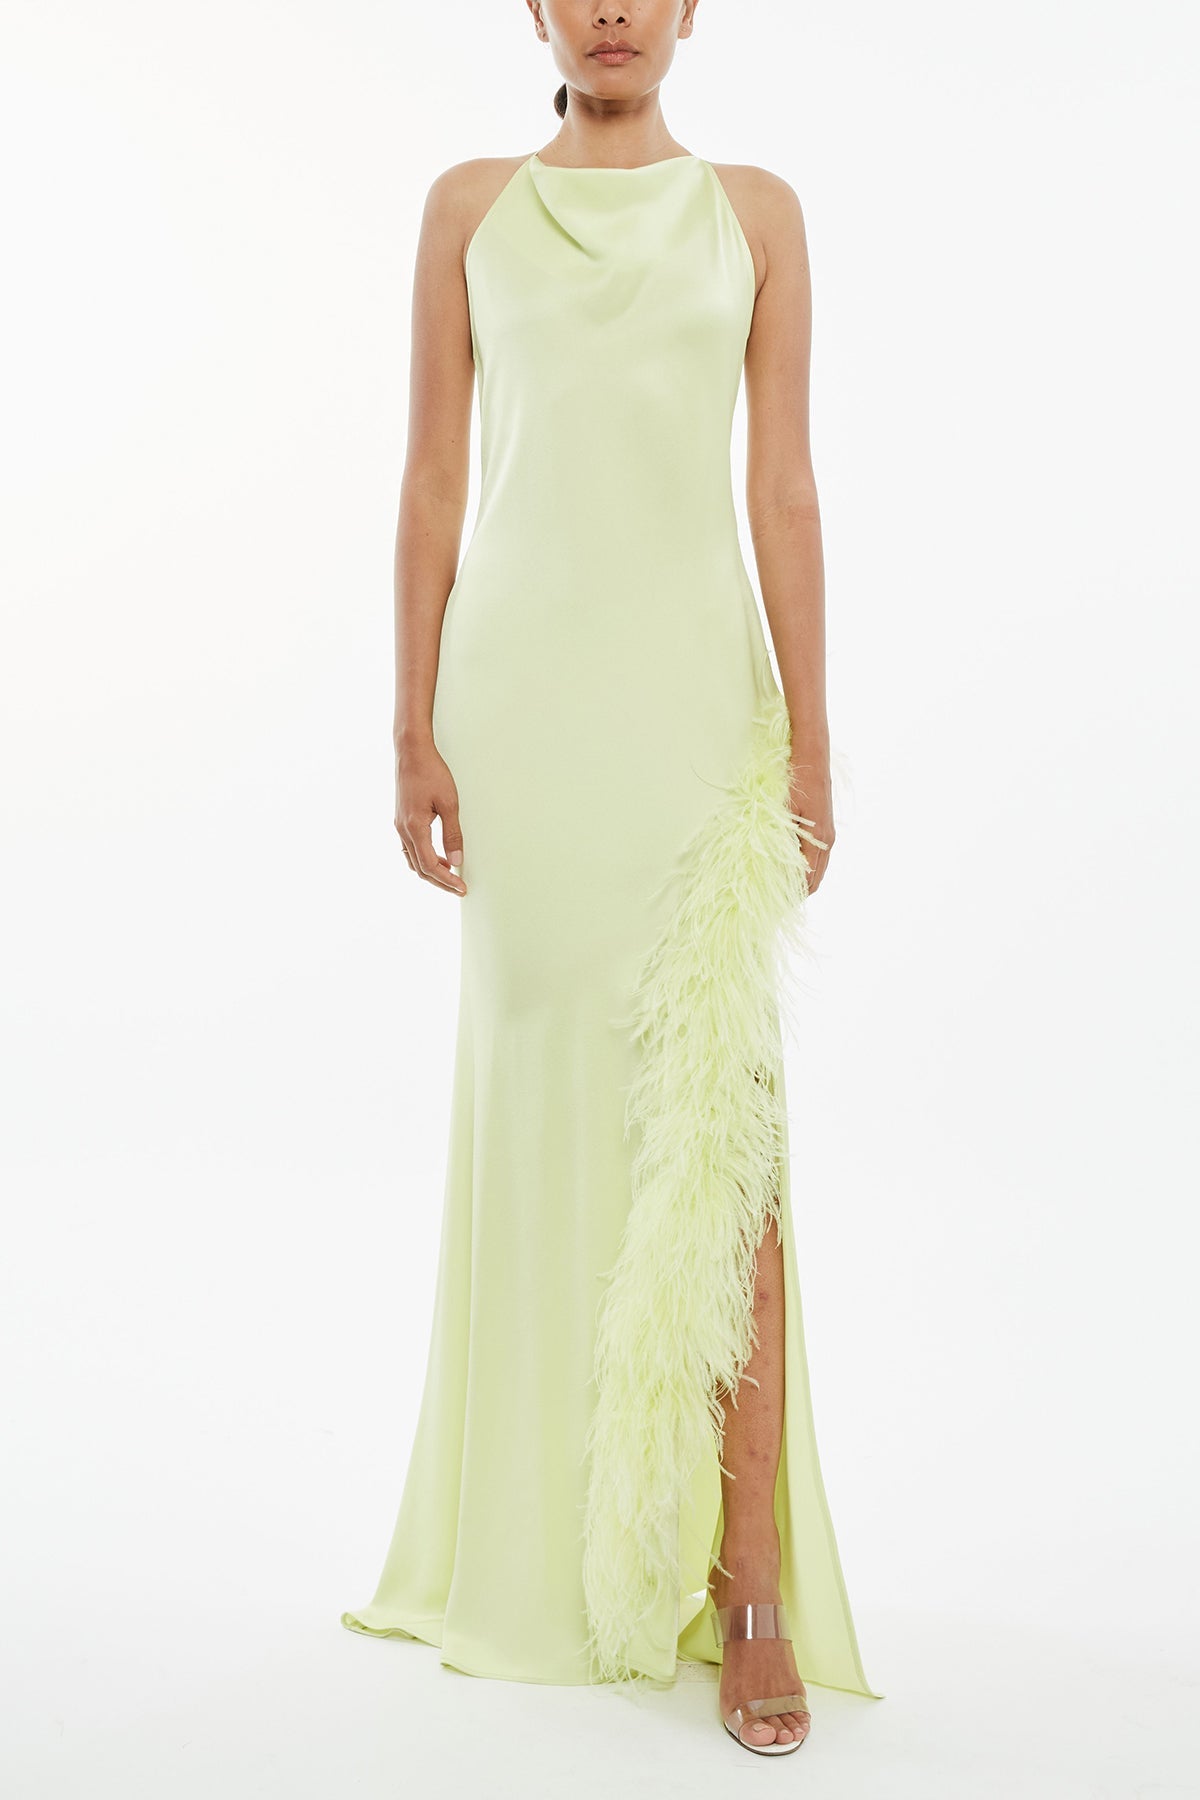 Satin Halter Gown with Feathers in Limon - shop-olivia.com